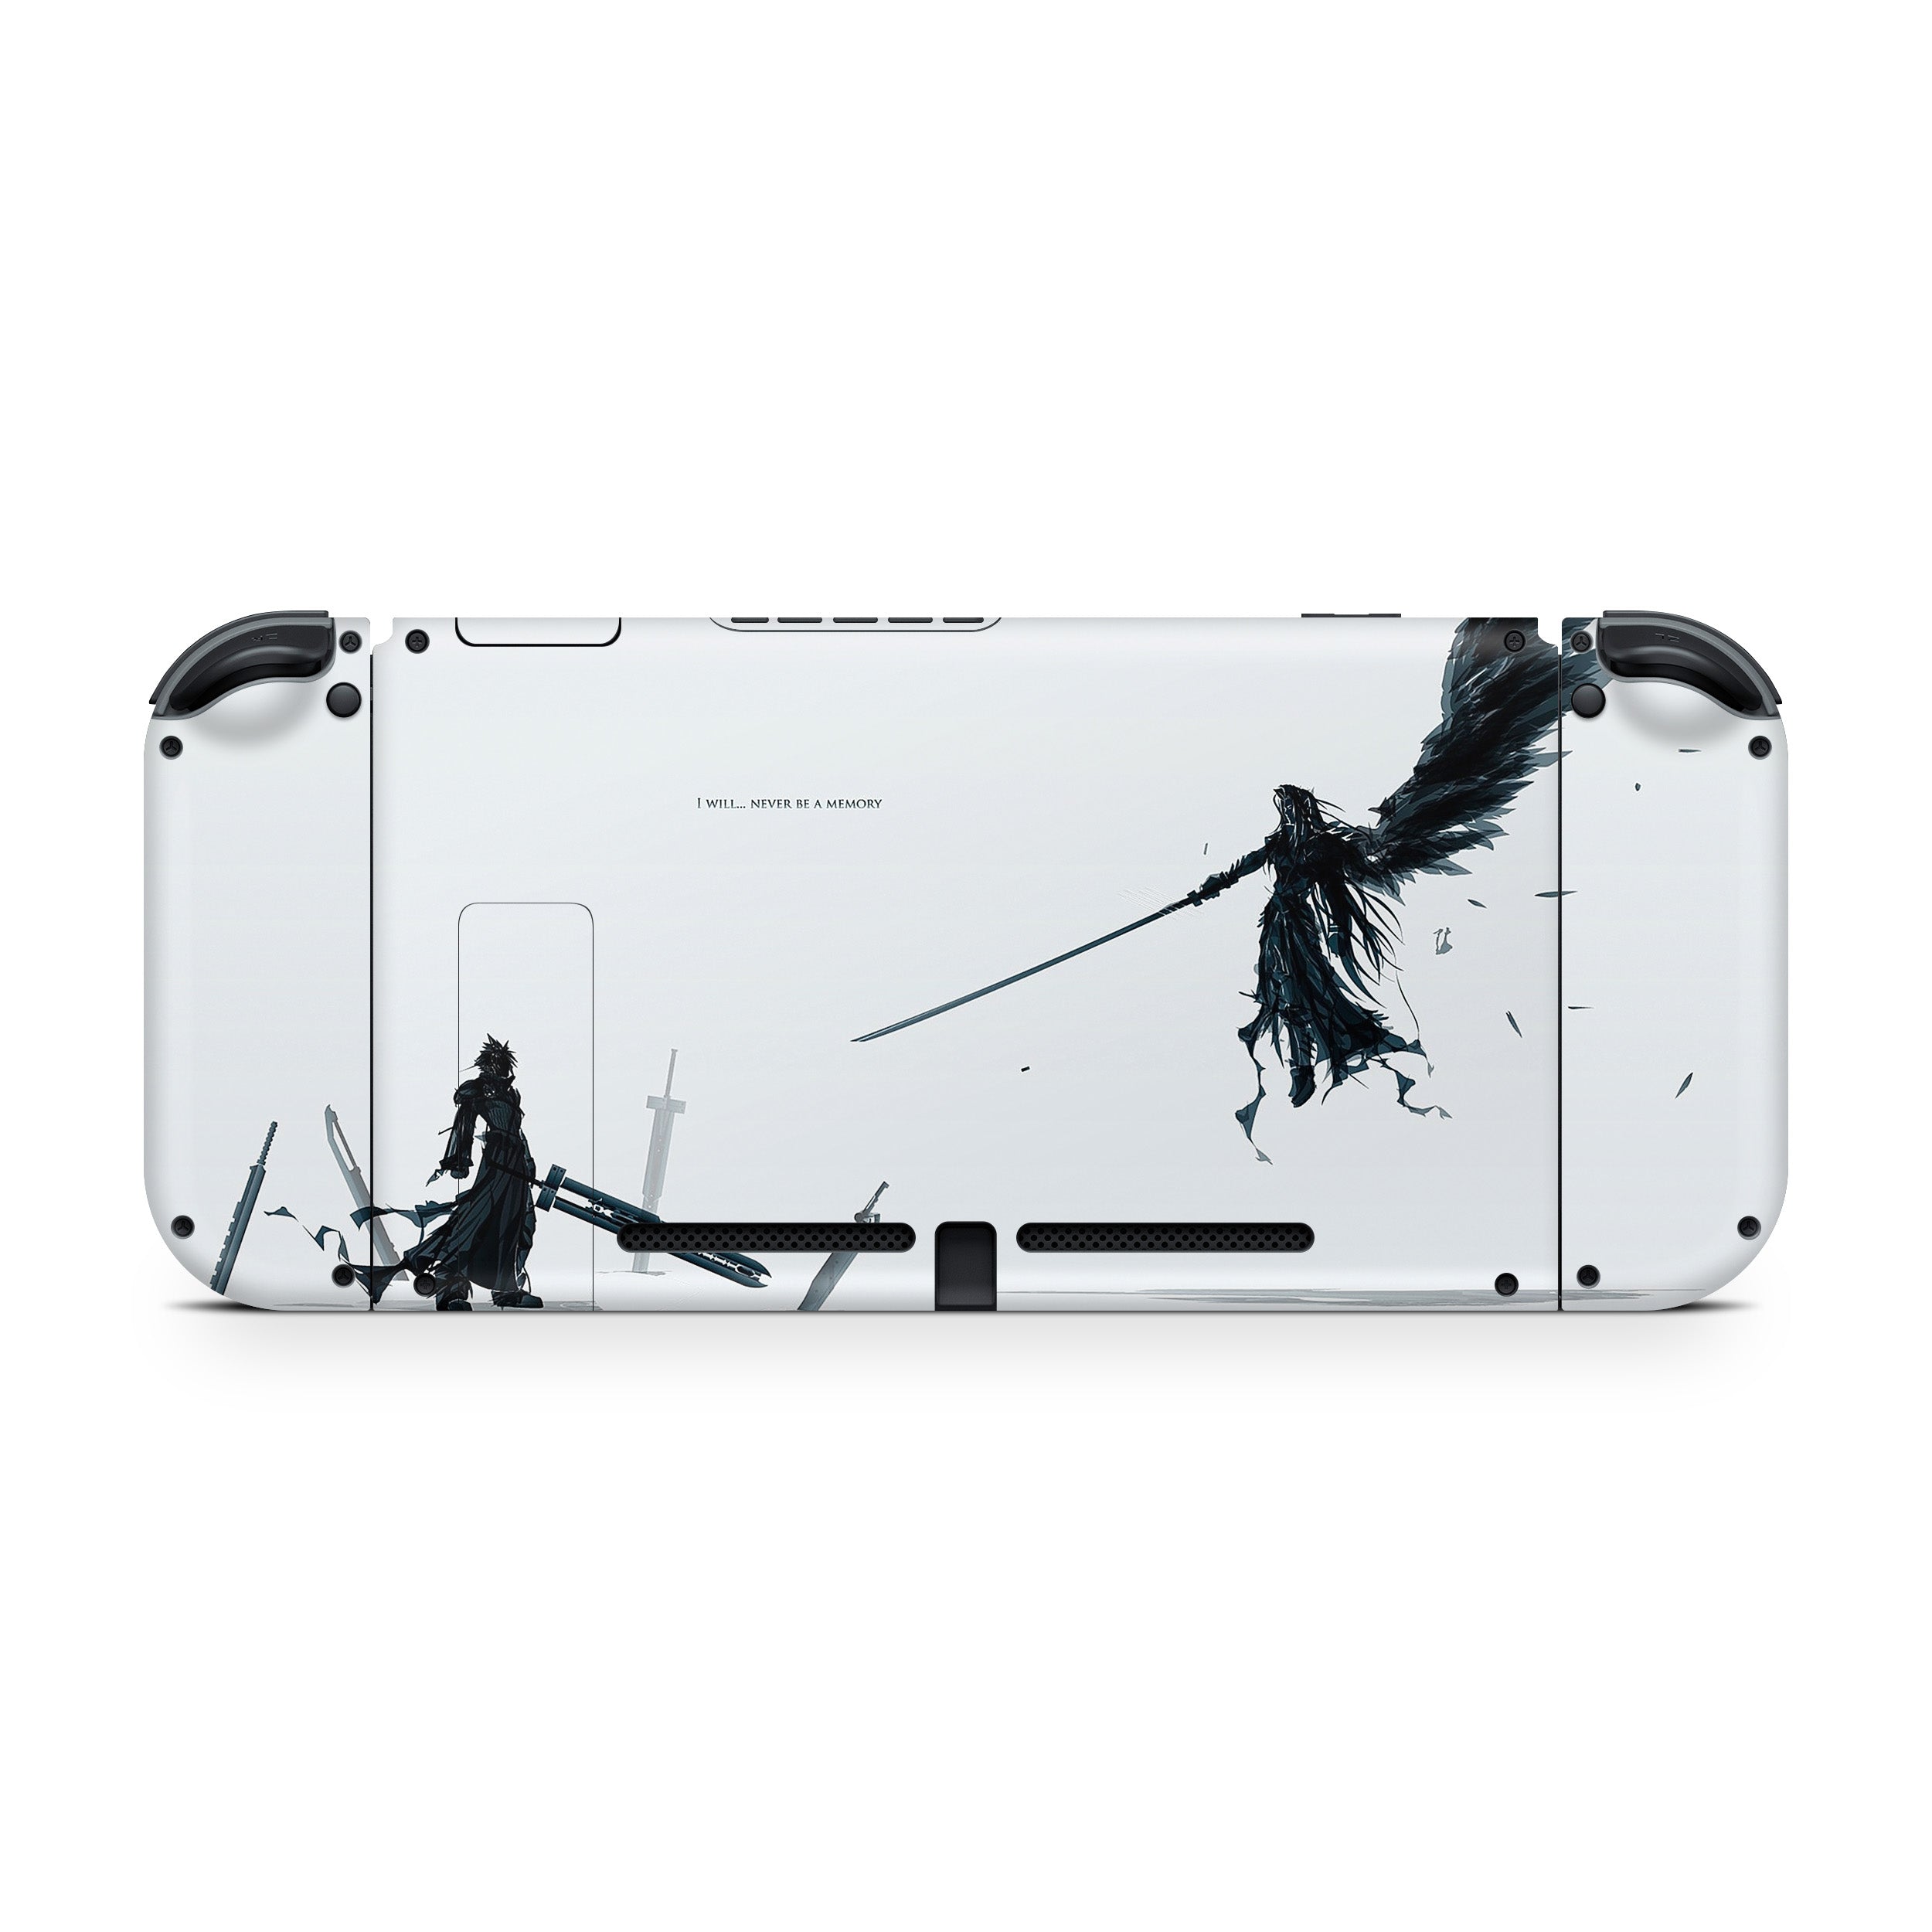 A video game skin featuring a Final Fantasy 7 Cloud design for the Nintendo Switch.